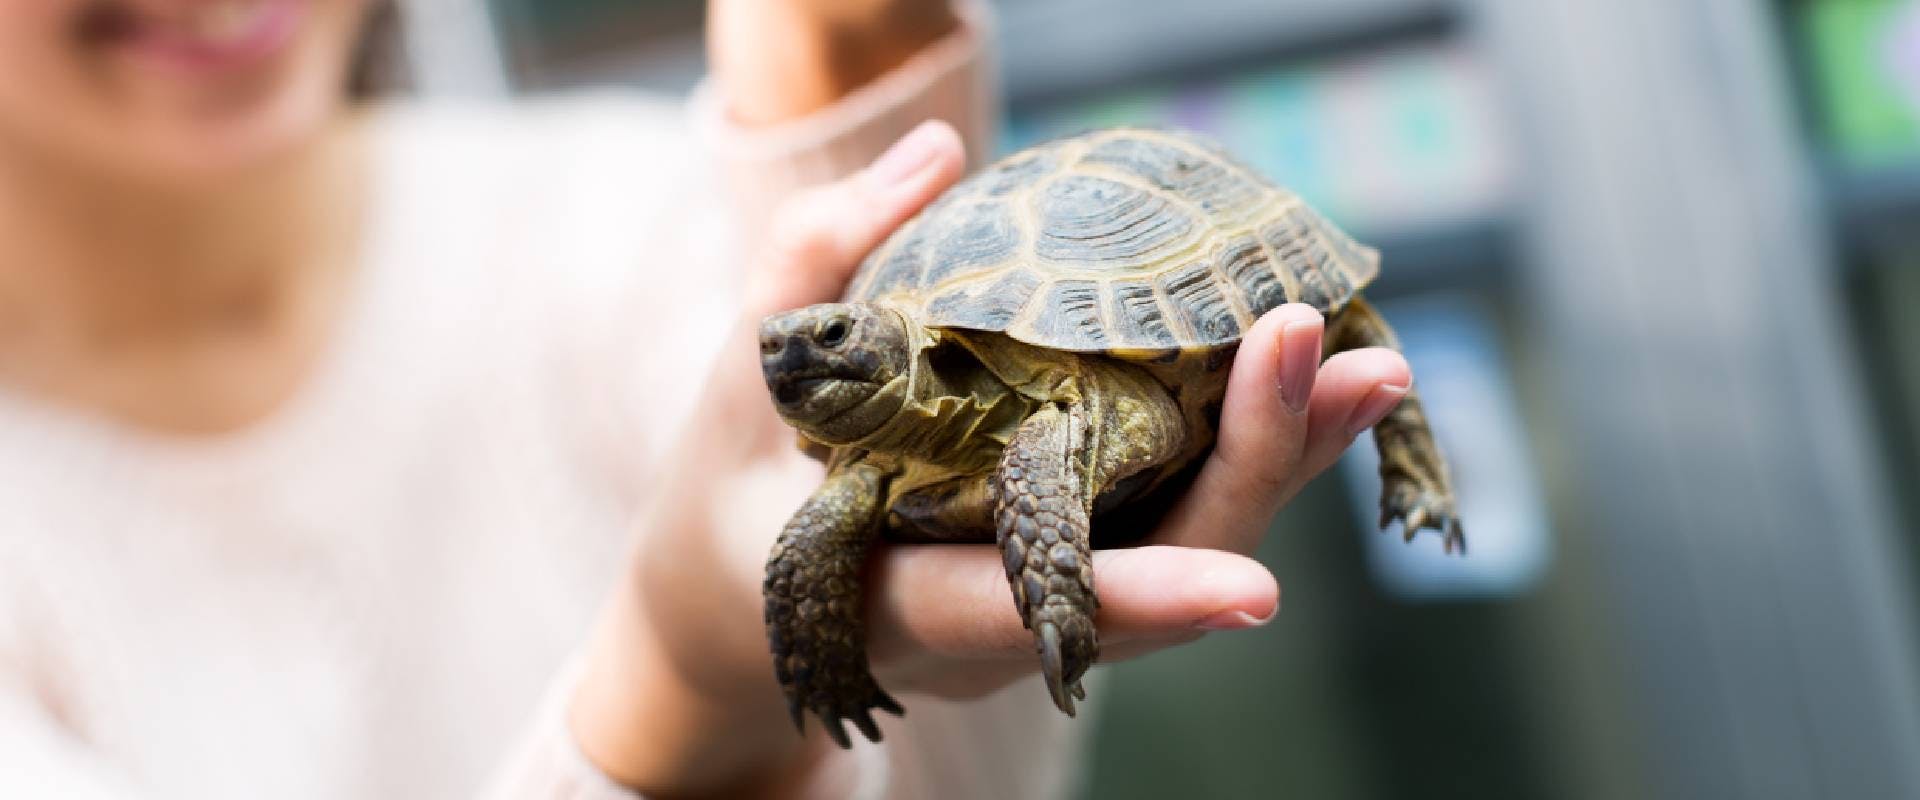 Person holding a small tortoise